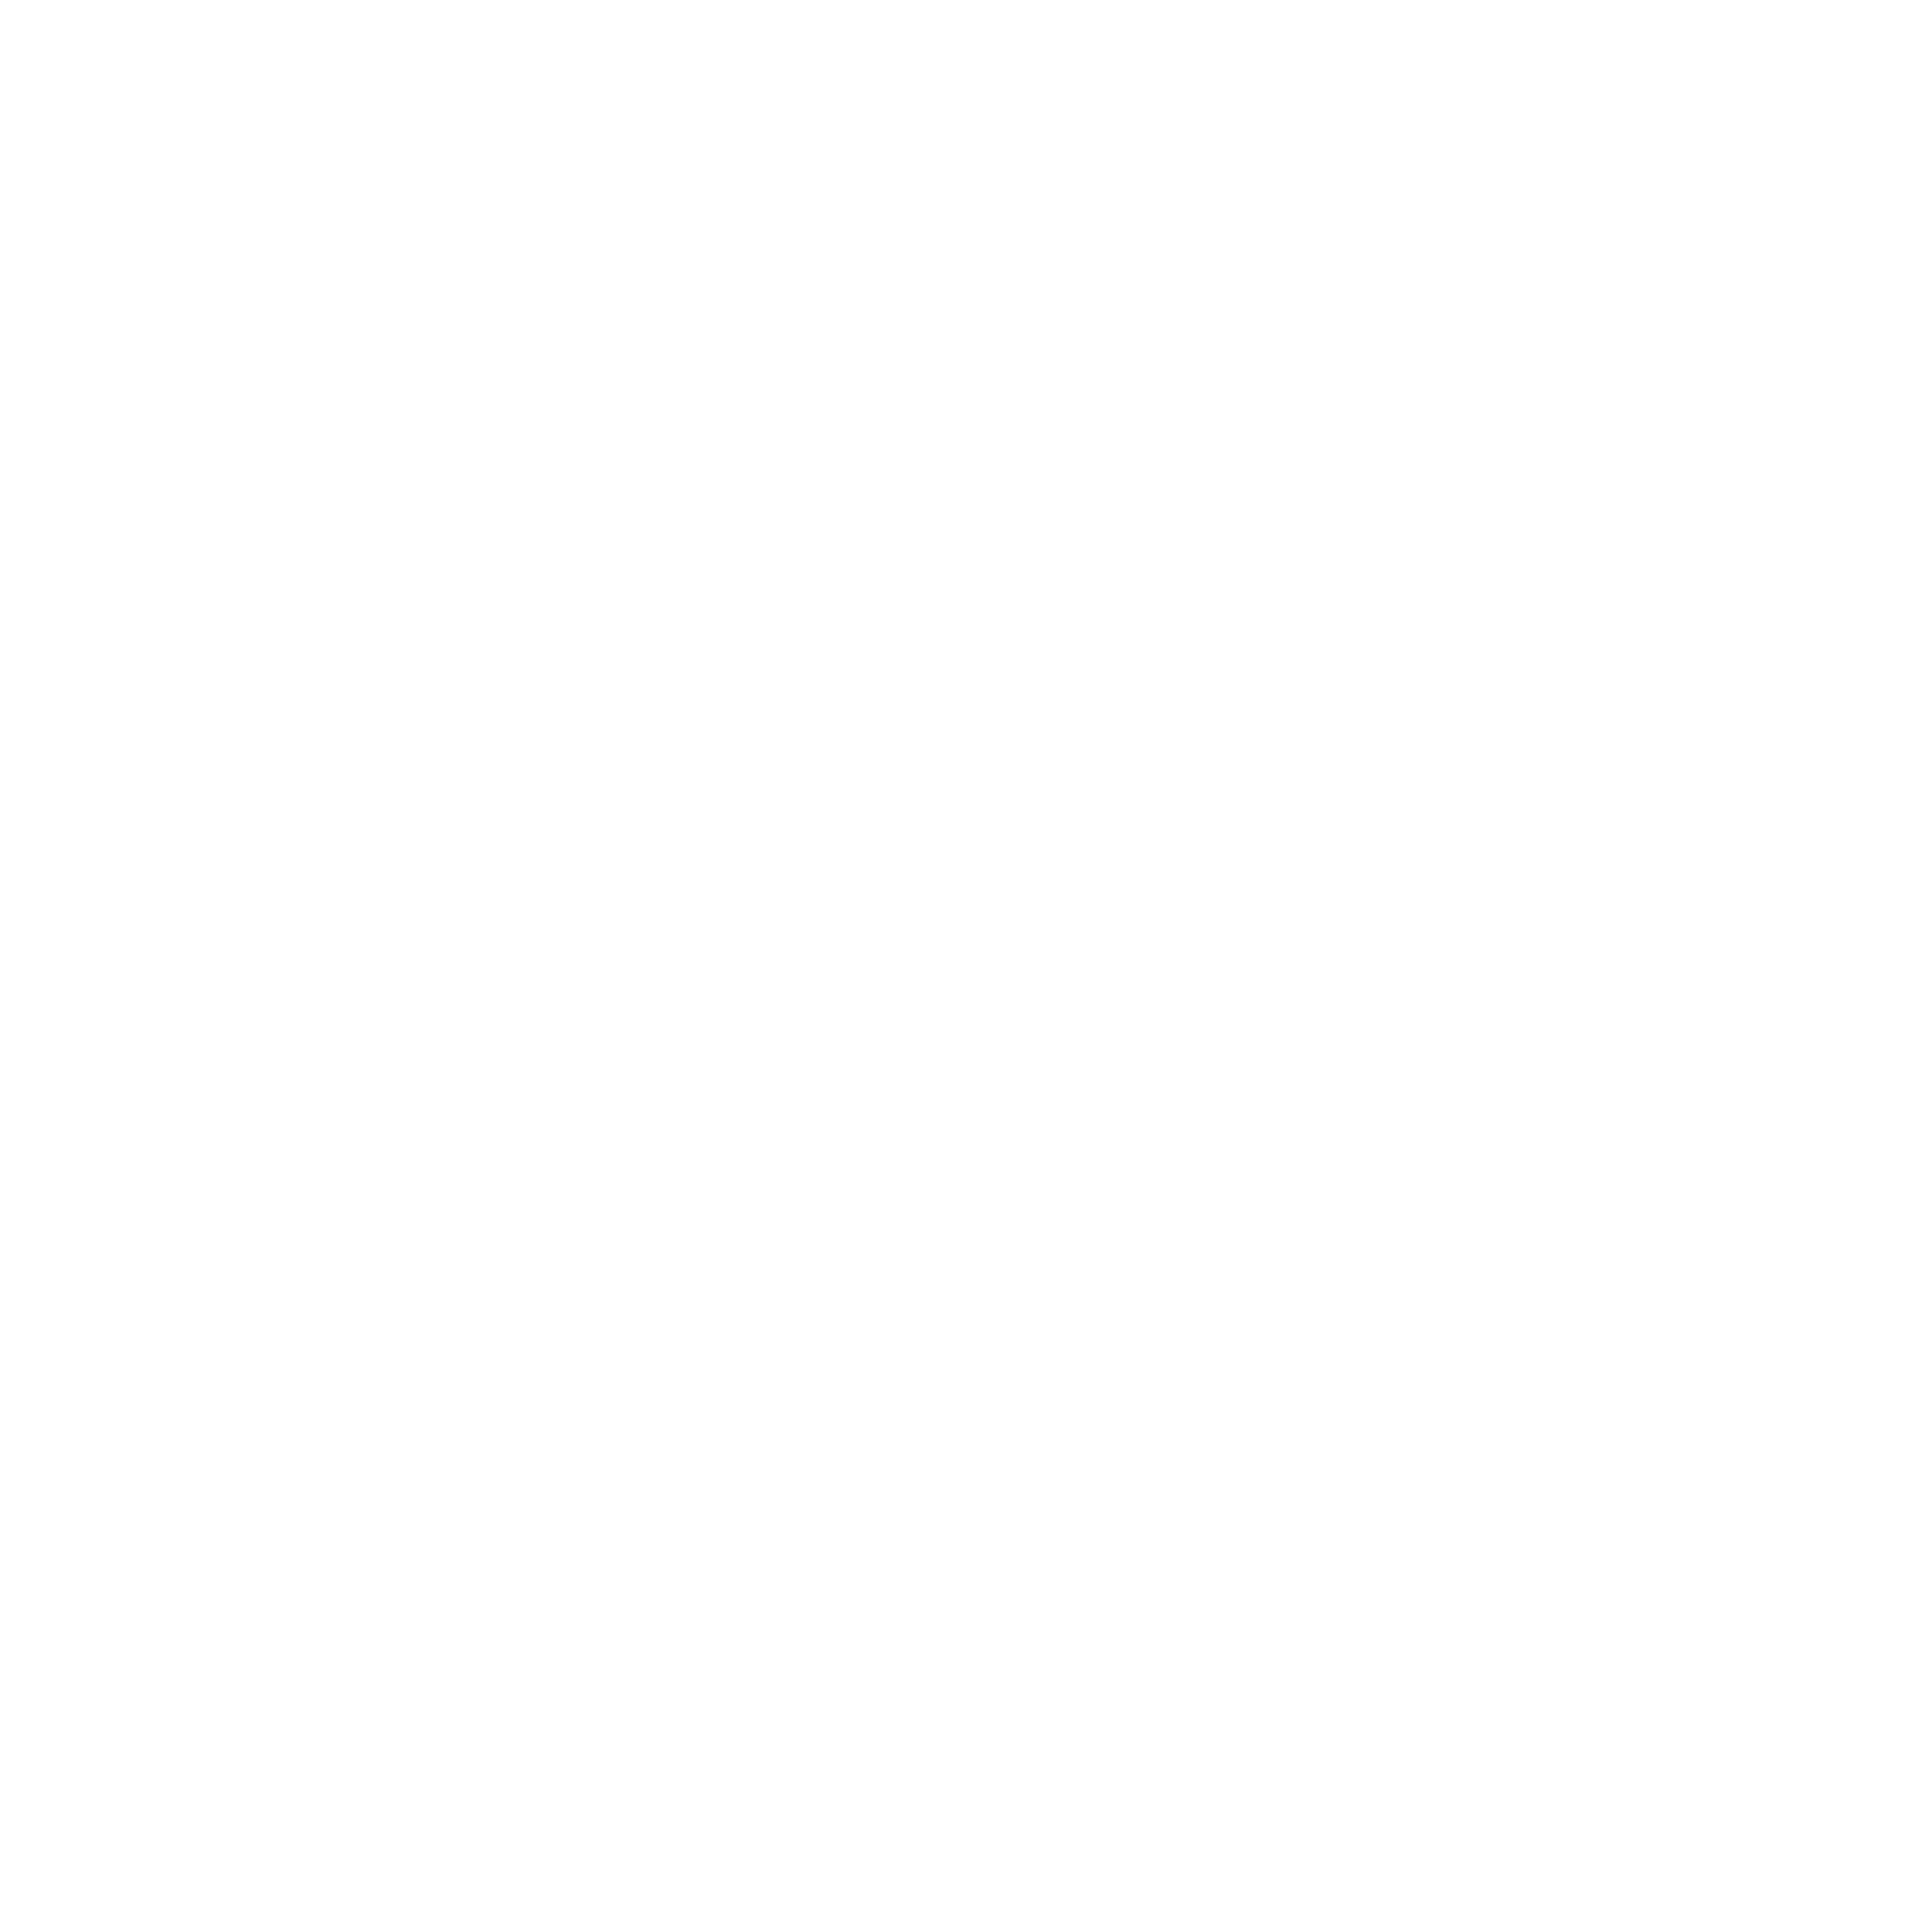 Counterparty Cryptocurrency icon